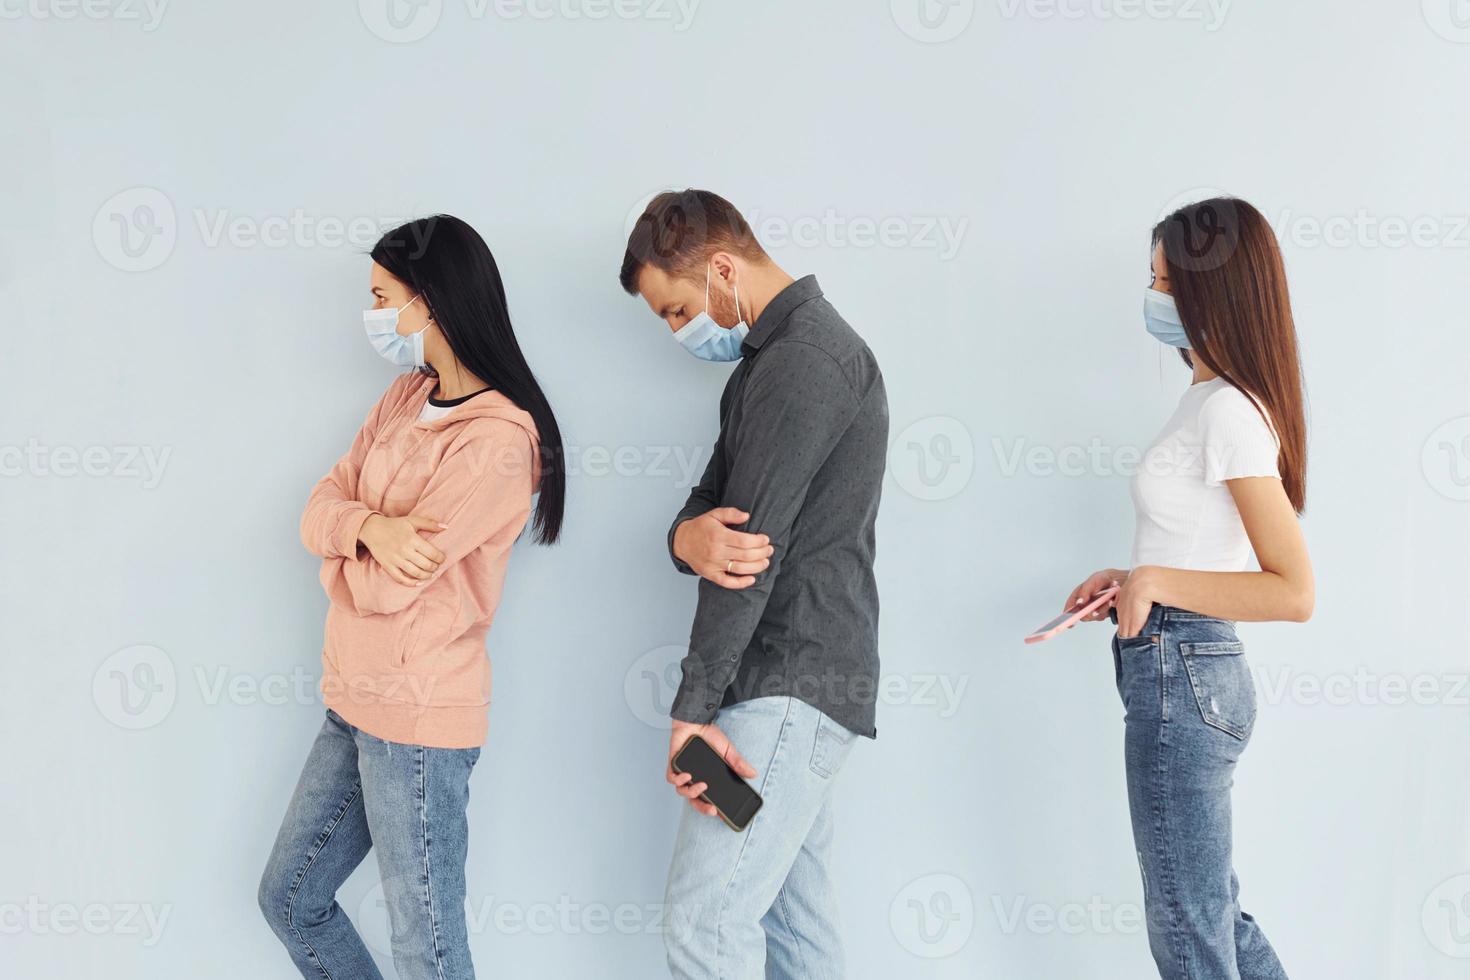 Three people standing together in the studio against white background photo